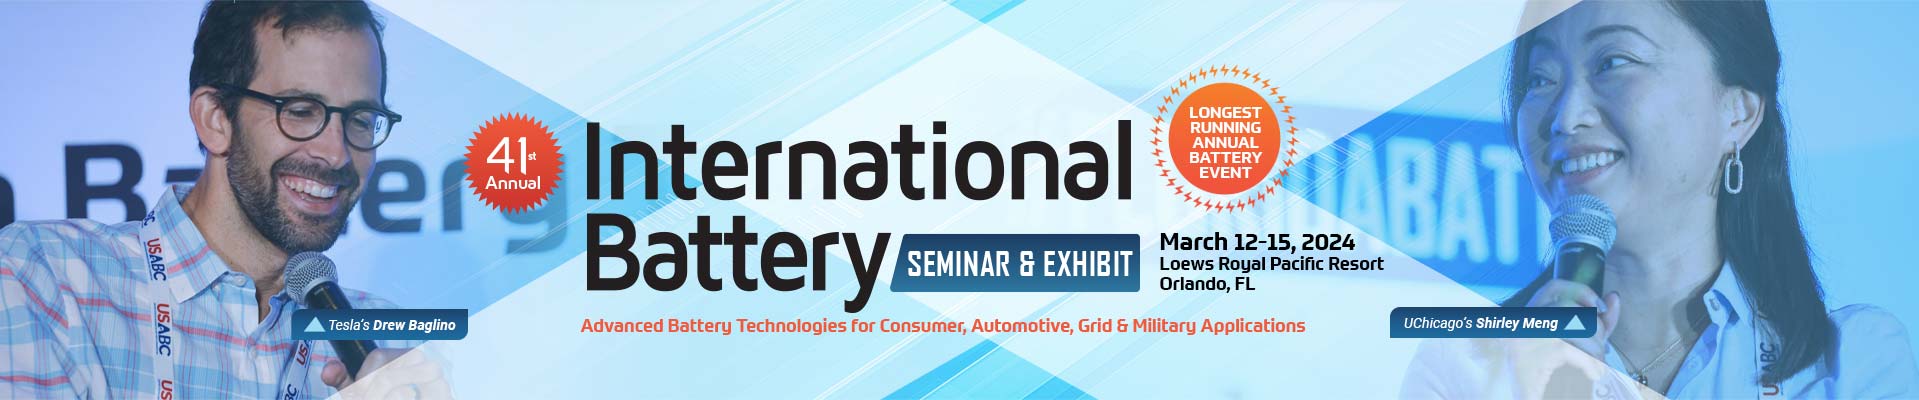 International Battery Conference Siminar and Exhibit - March 12-15, 2024 - Orlando, FL